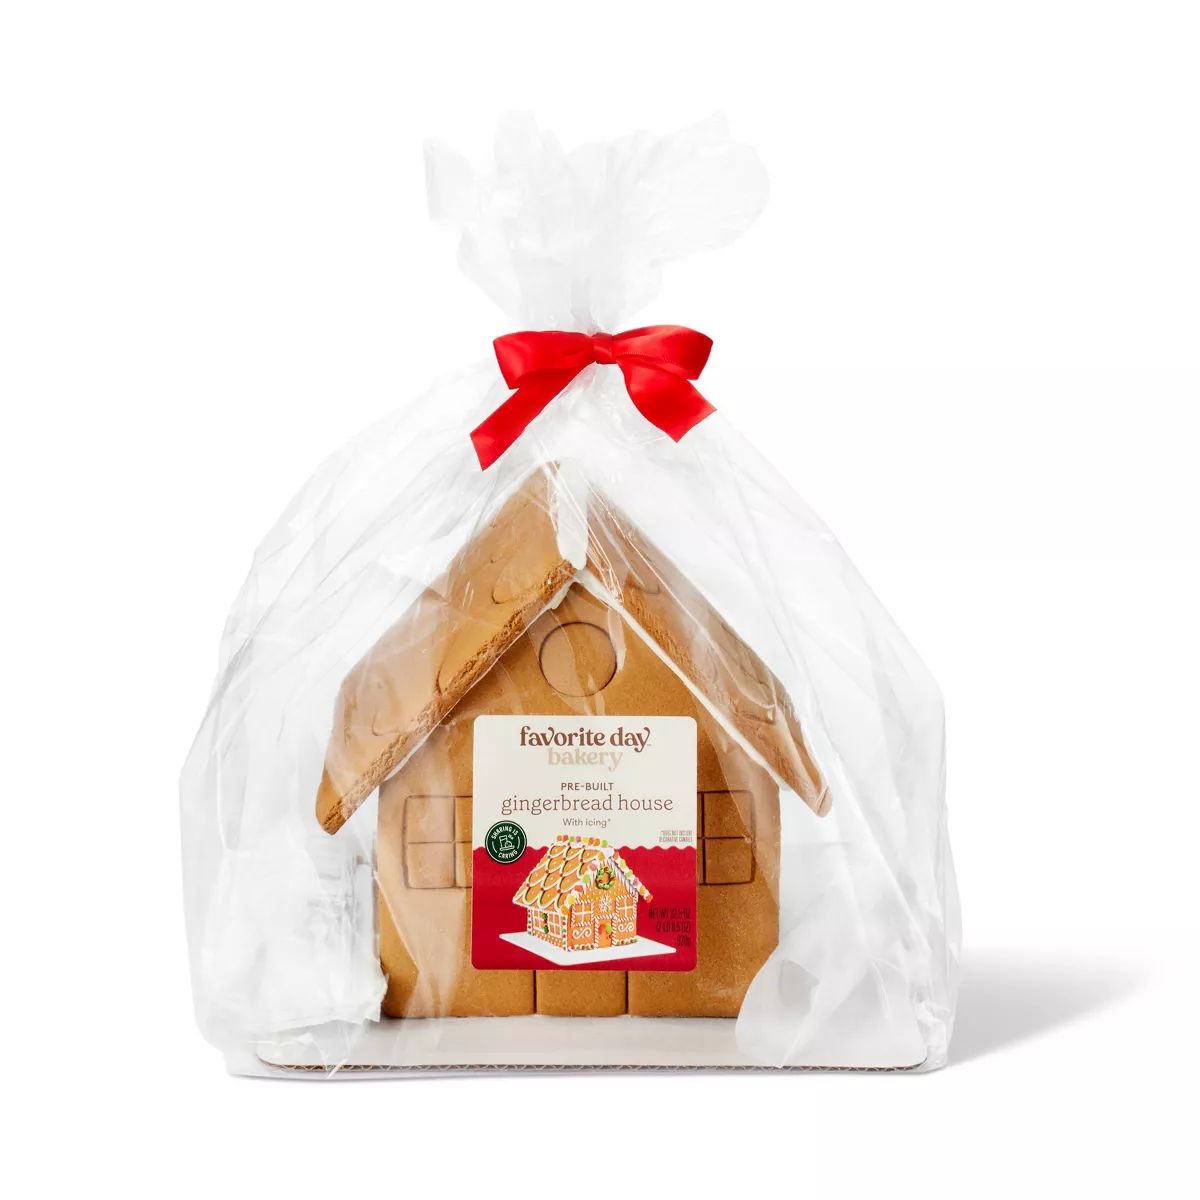 Holiday Pre-Built Gingerbread House Kit - 32.5oz - Favorite Day™ | Target